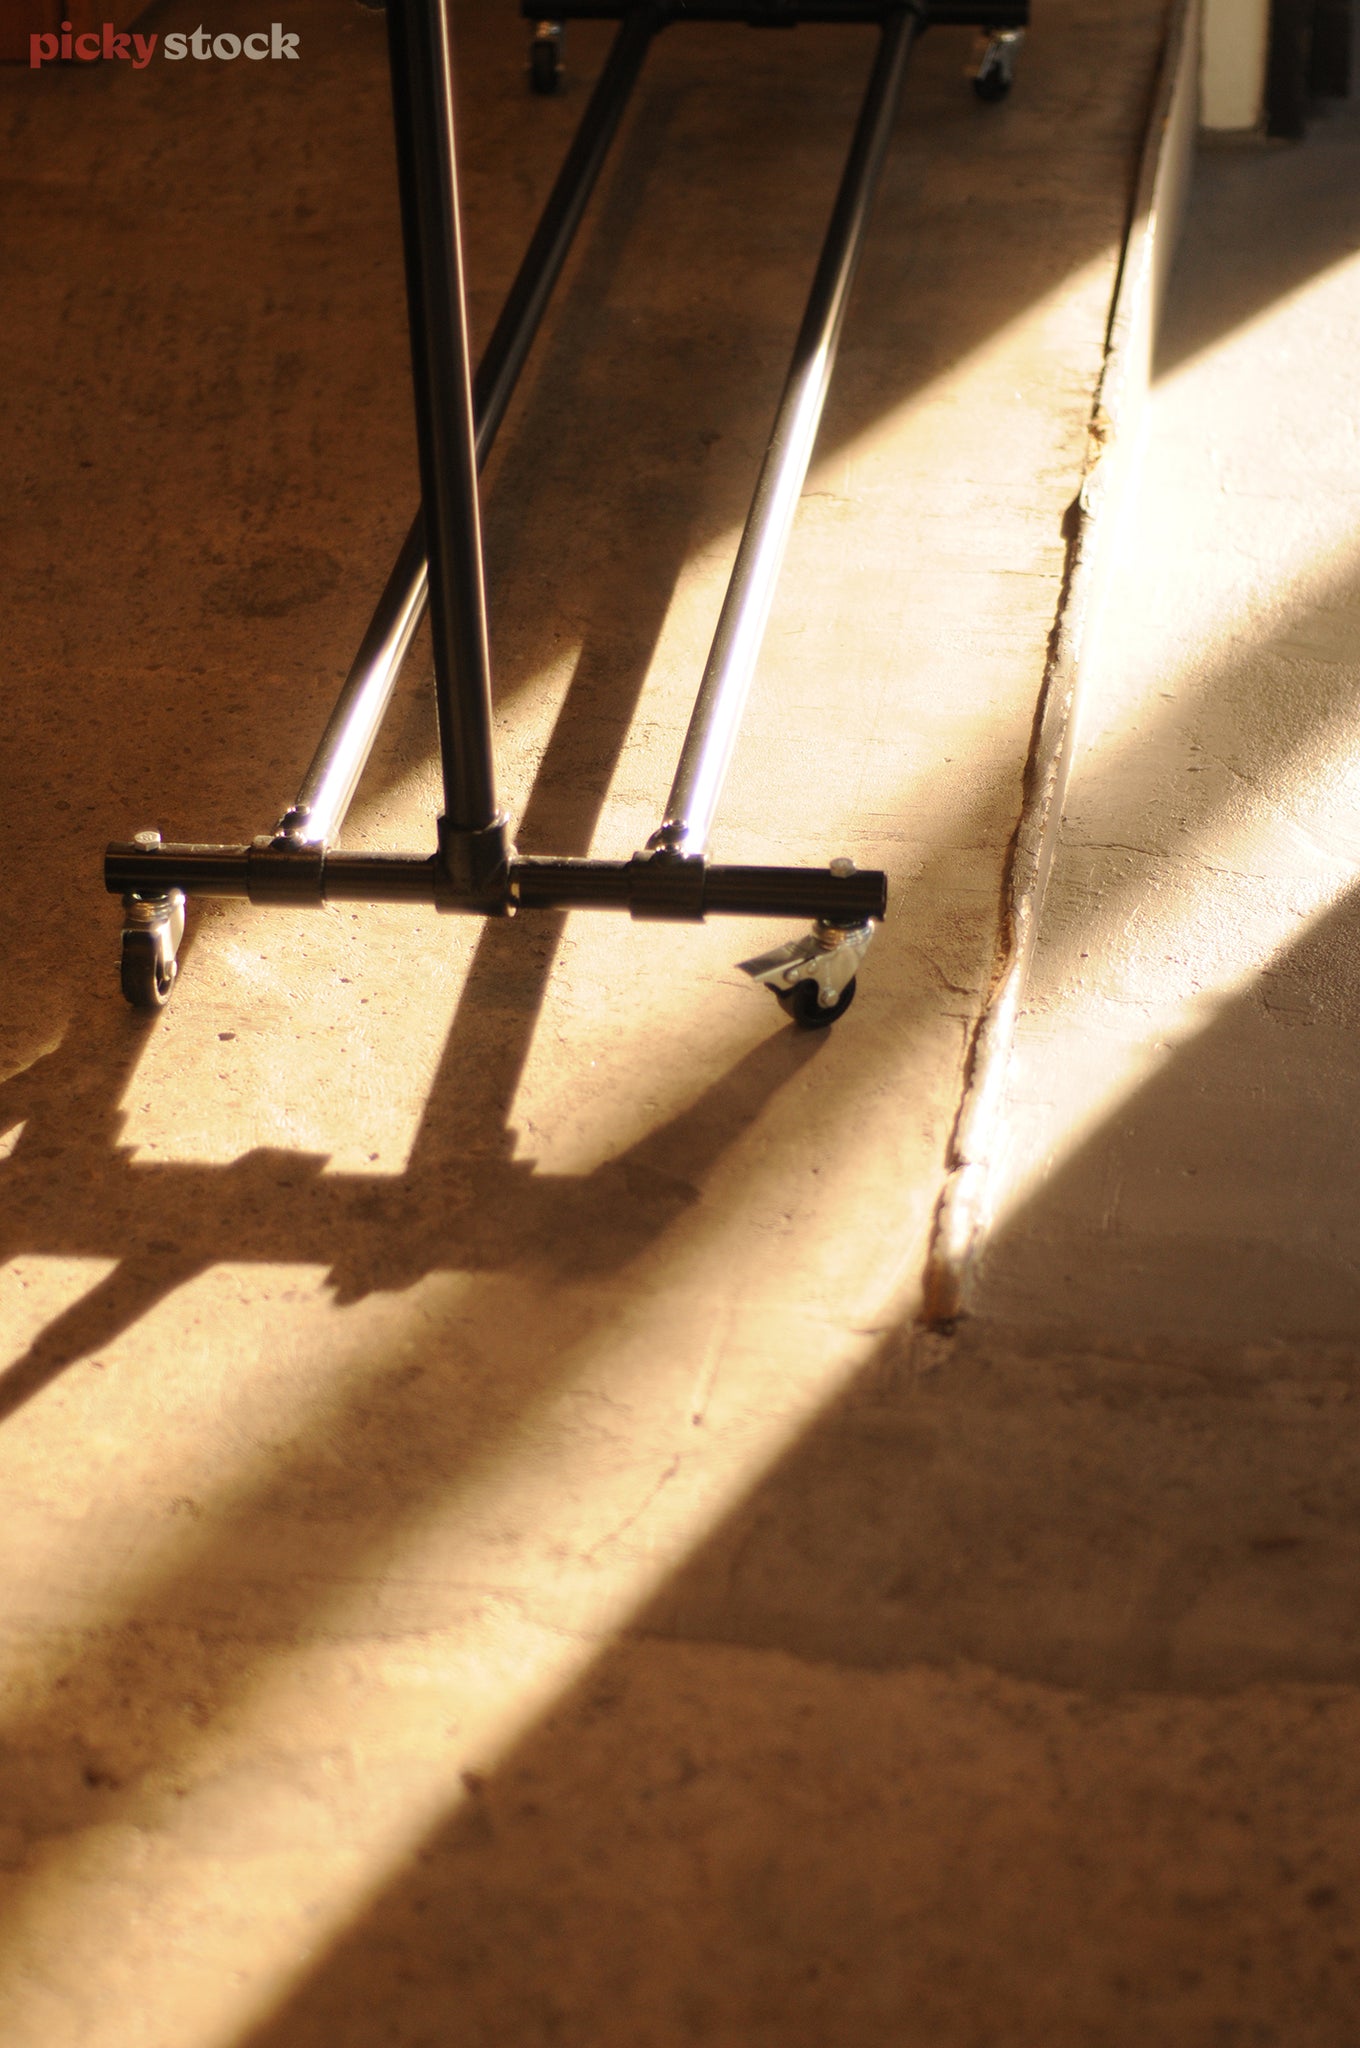 Portrait close-up of a metal clothing rack on the concrete floor, the sun casts two rays of light across the floor reflecting off the base of the clothing rack.